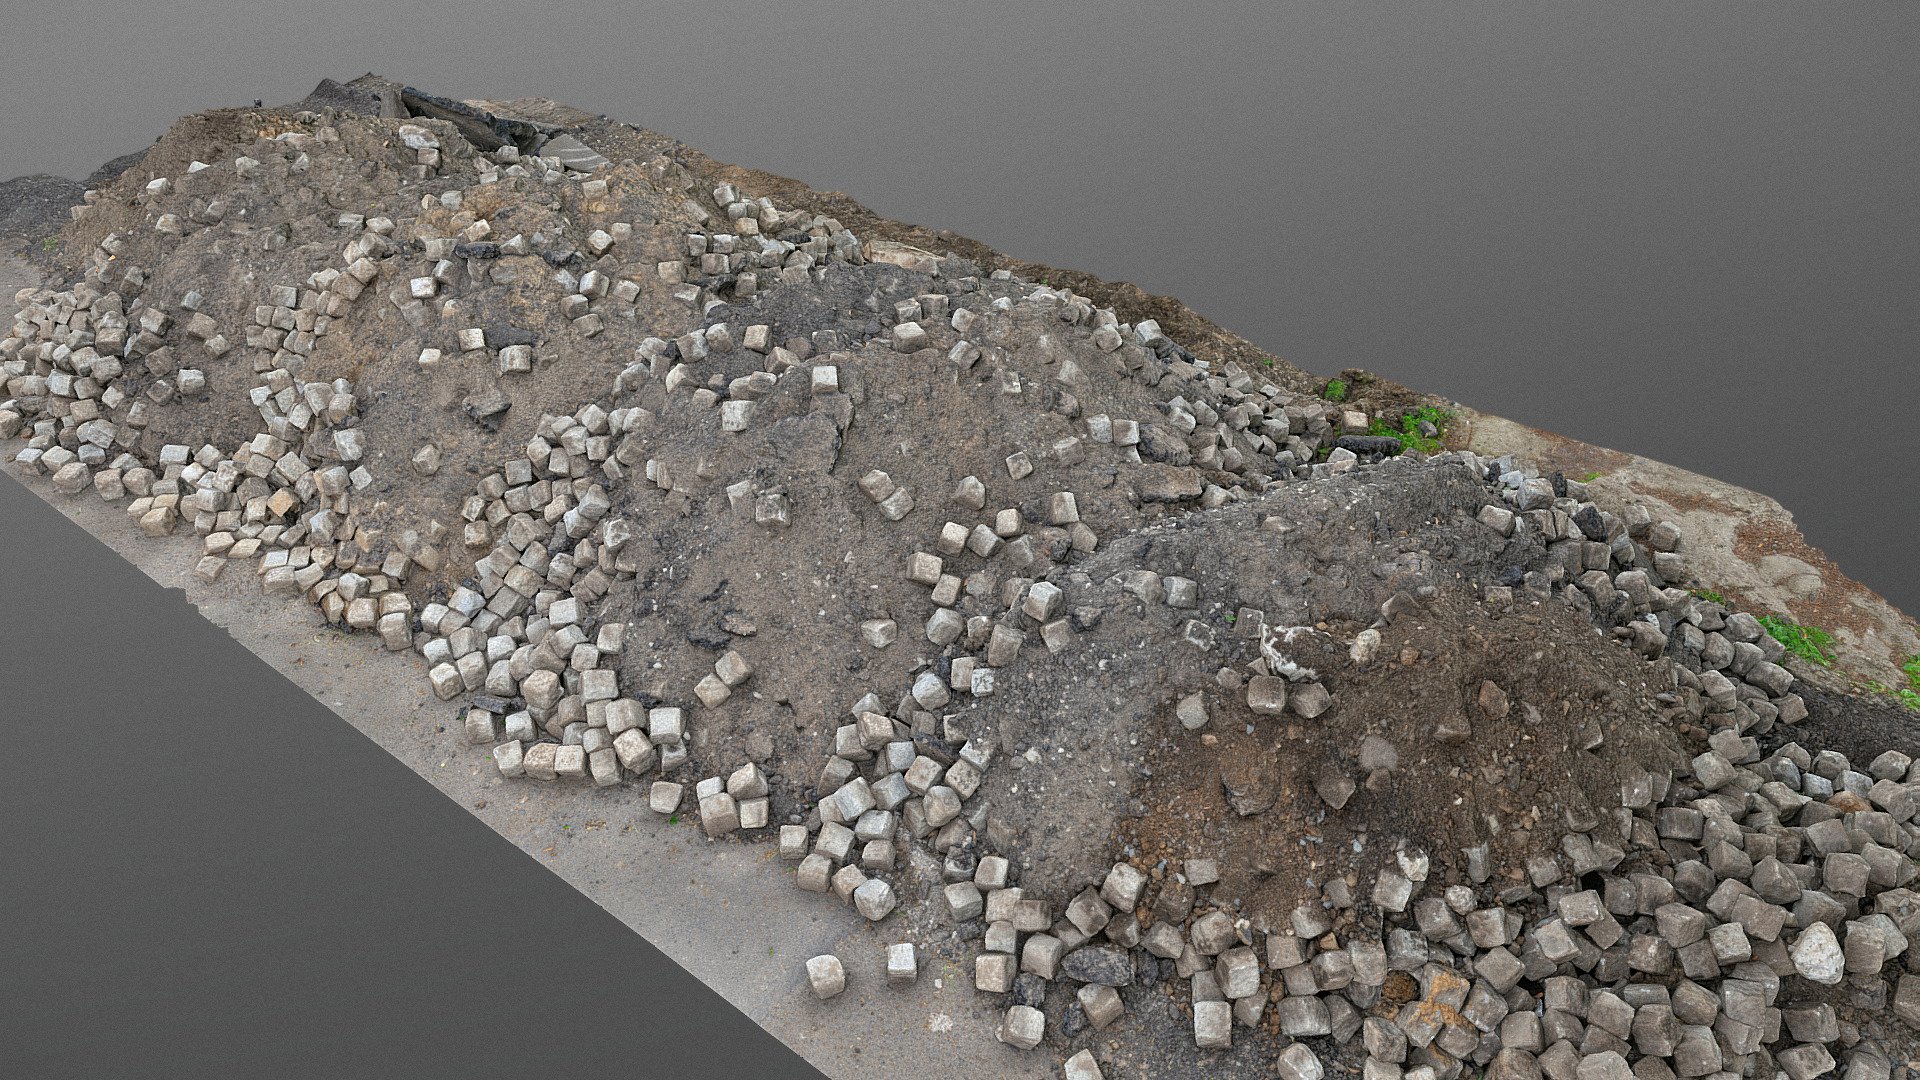 Pile of construction soil mud land earth dirt heap pile mound, freshly digged, mixed with some debris, grass, dry soil and sett sampietrini cobblestone paving cube blocks

Photogrammetry scan 340x24MP, 3x16K texture + HD Normals, fully delighted - Construction soil mud heap with paving - Buy Royalty Free 3D model by matousekfoto 3d model